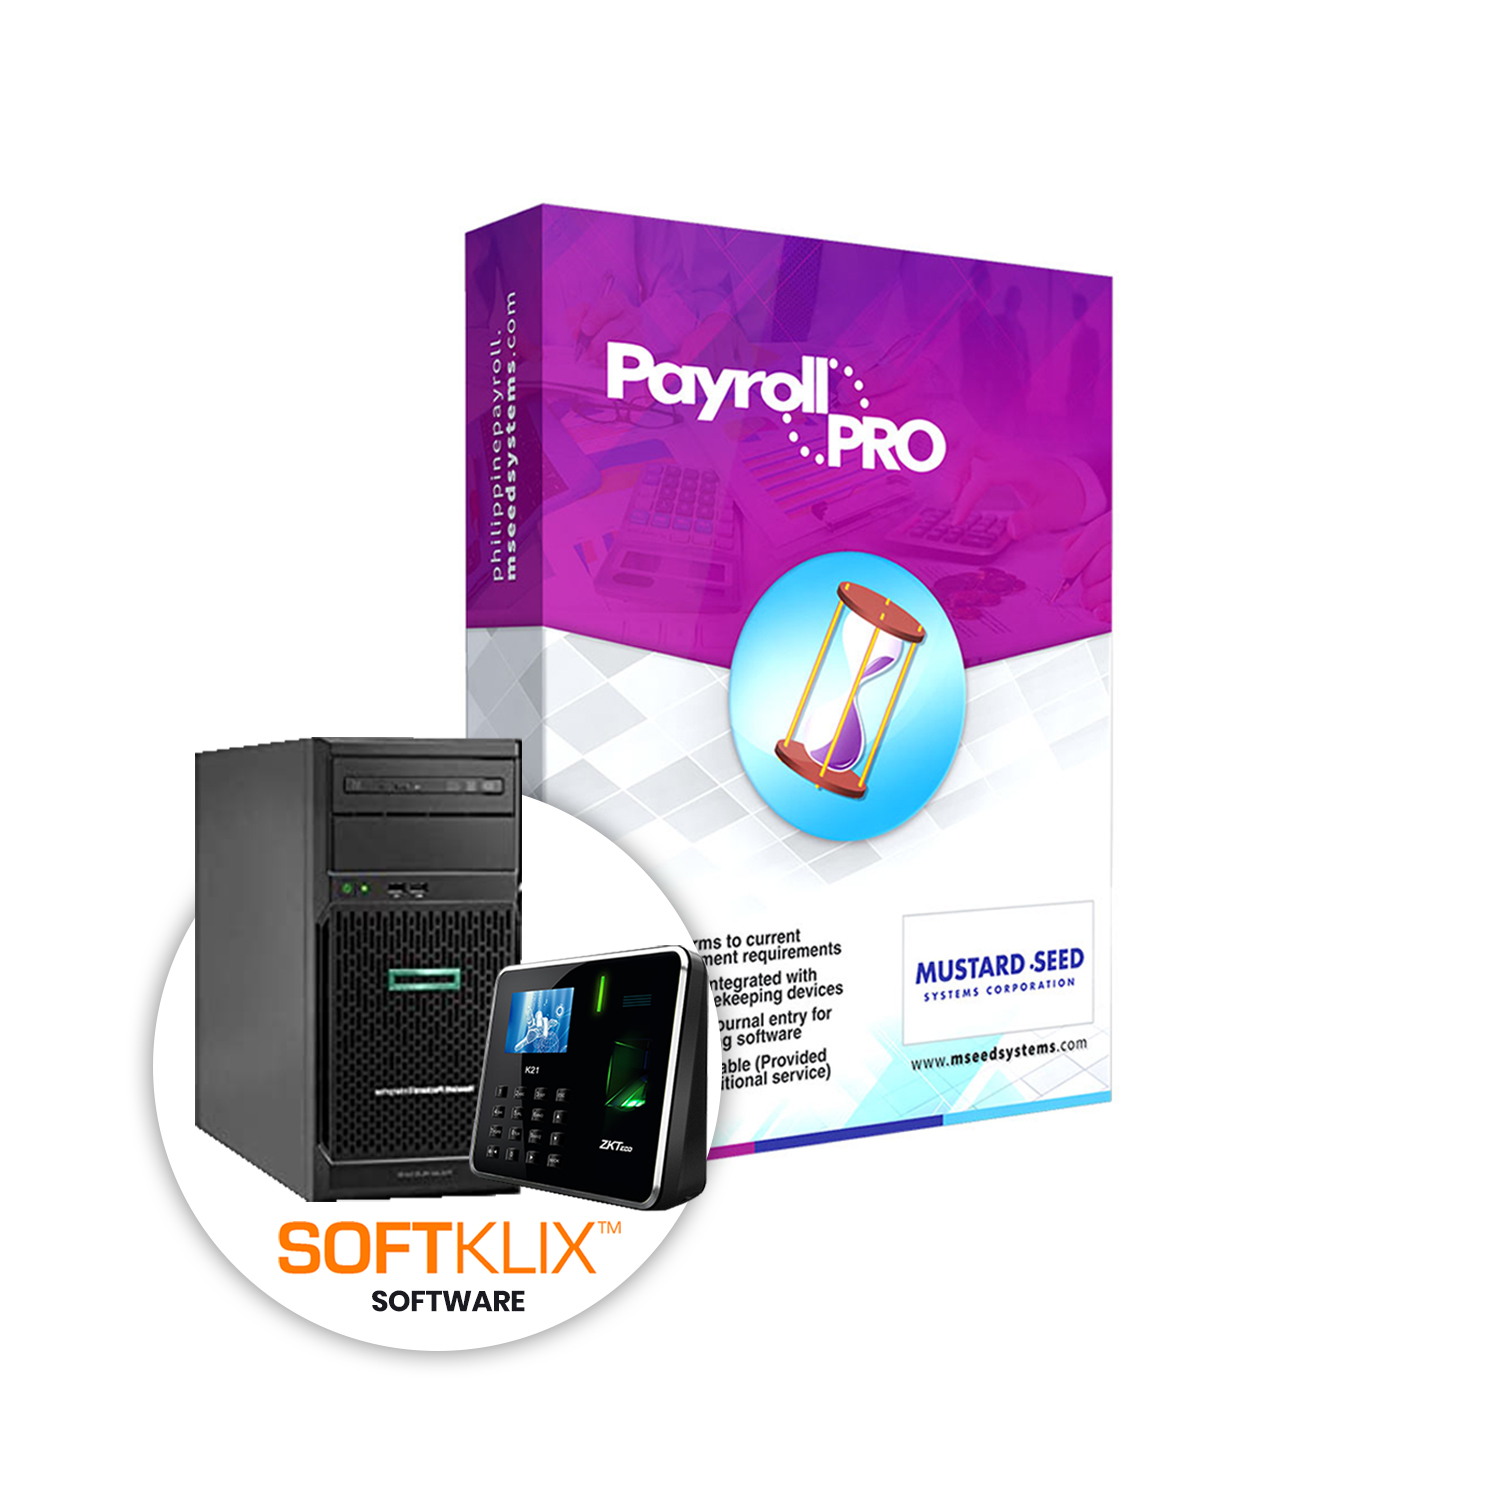 payroll pro promo package